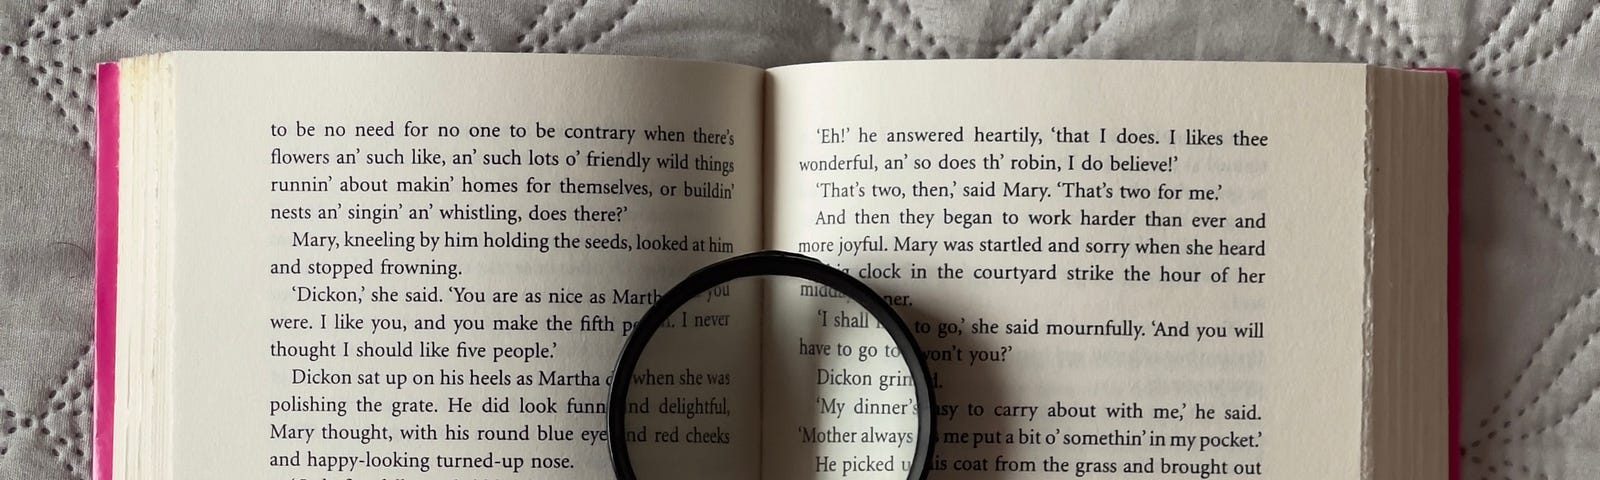 An open book with a magnifying glass sitting on the text